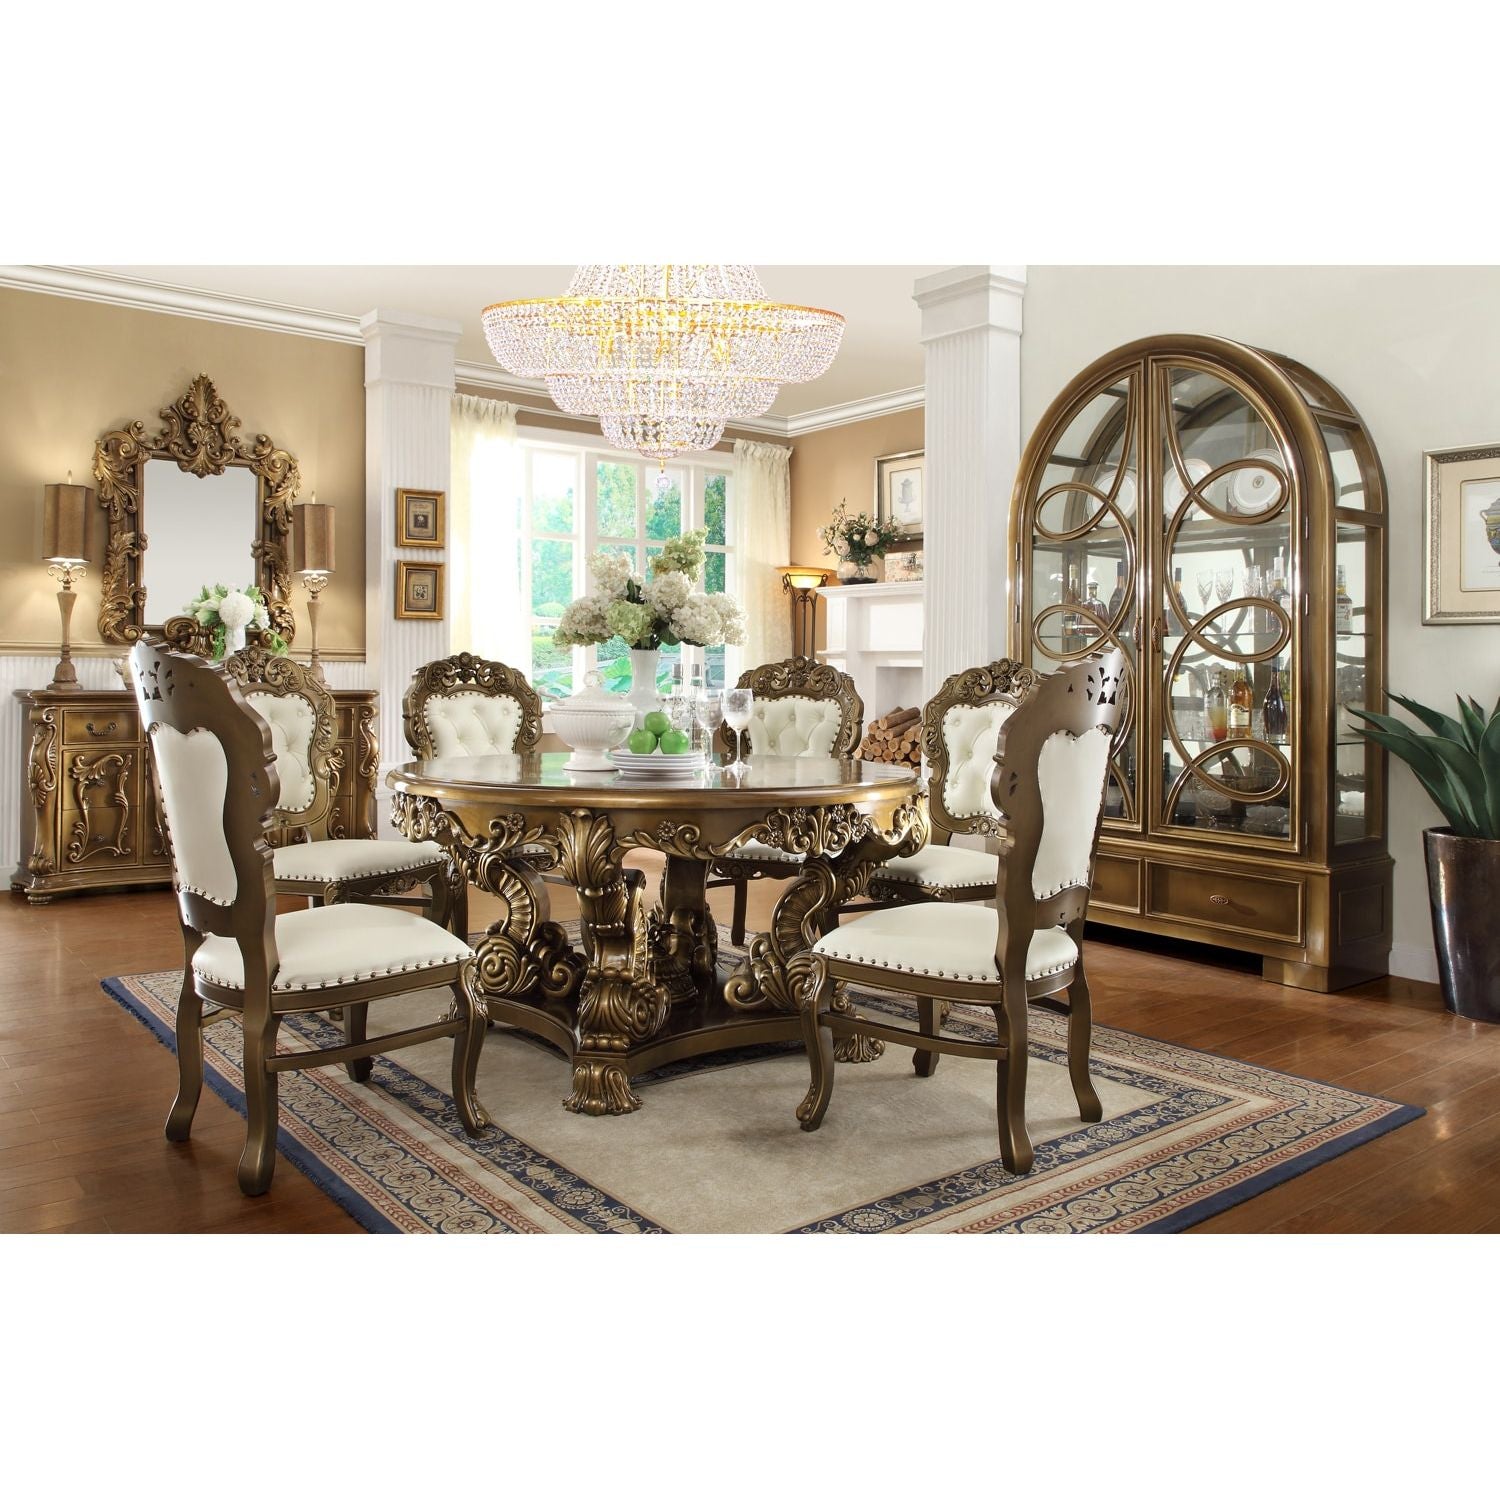 Homey Design HD-8008 - 7PC DINING TABLE SET - New Star Living